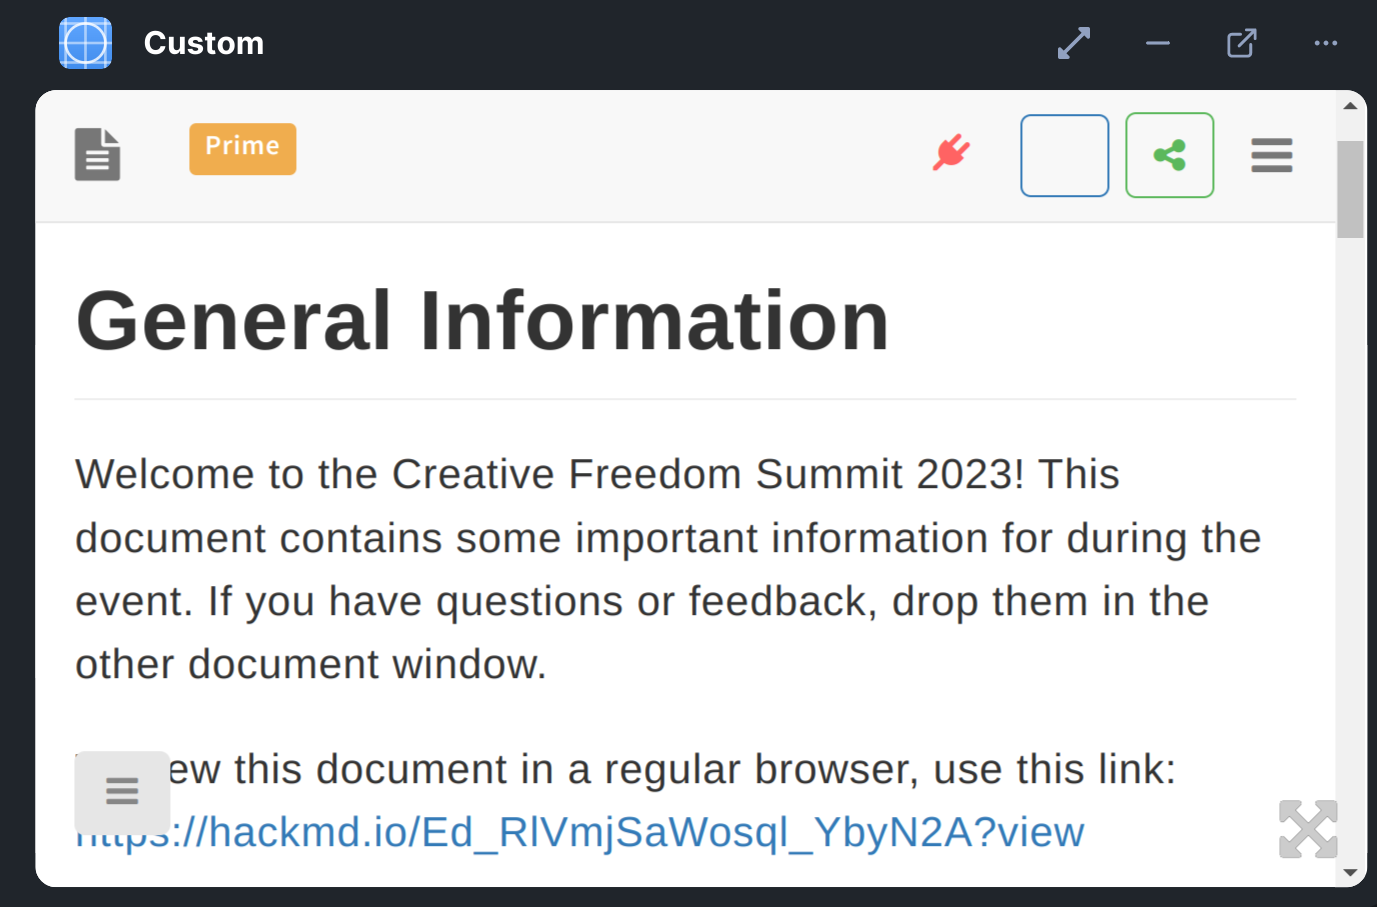 Screenshot of an etherpad titled "General information" that has some info about the Creative Freedom Summit